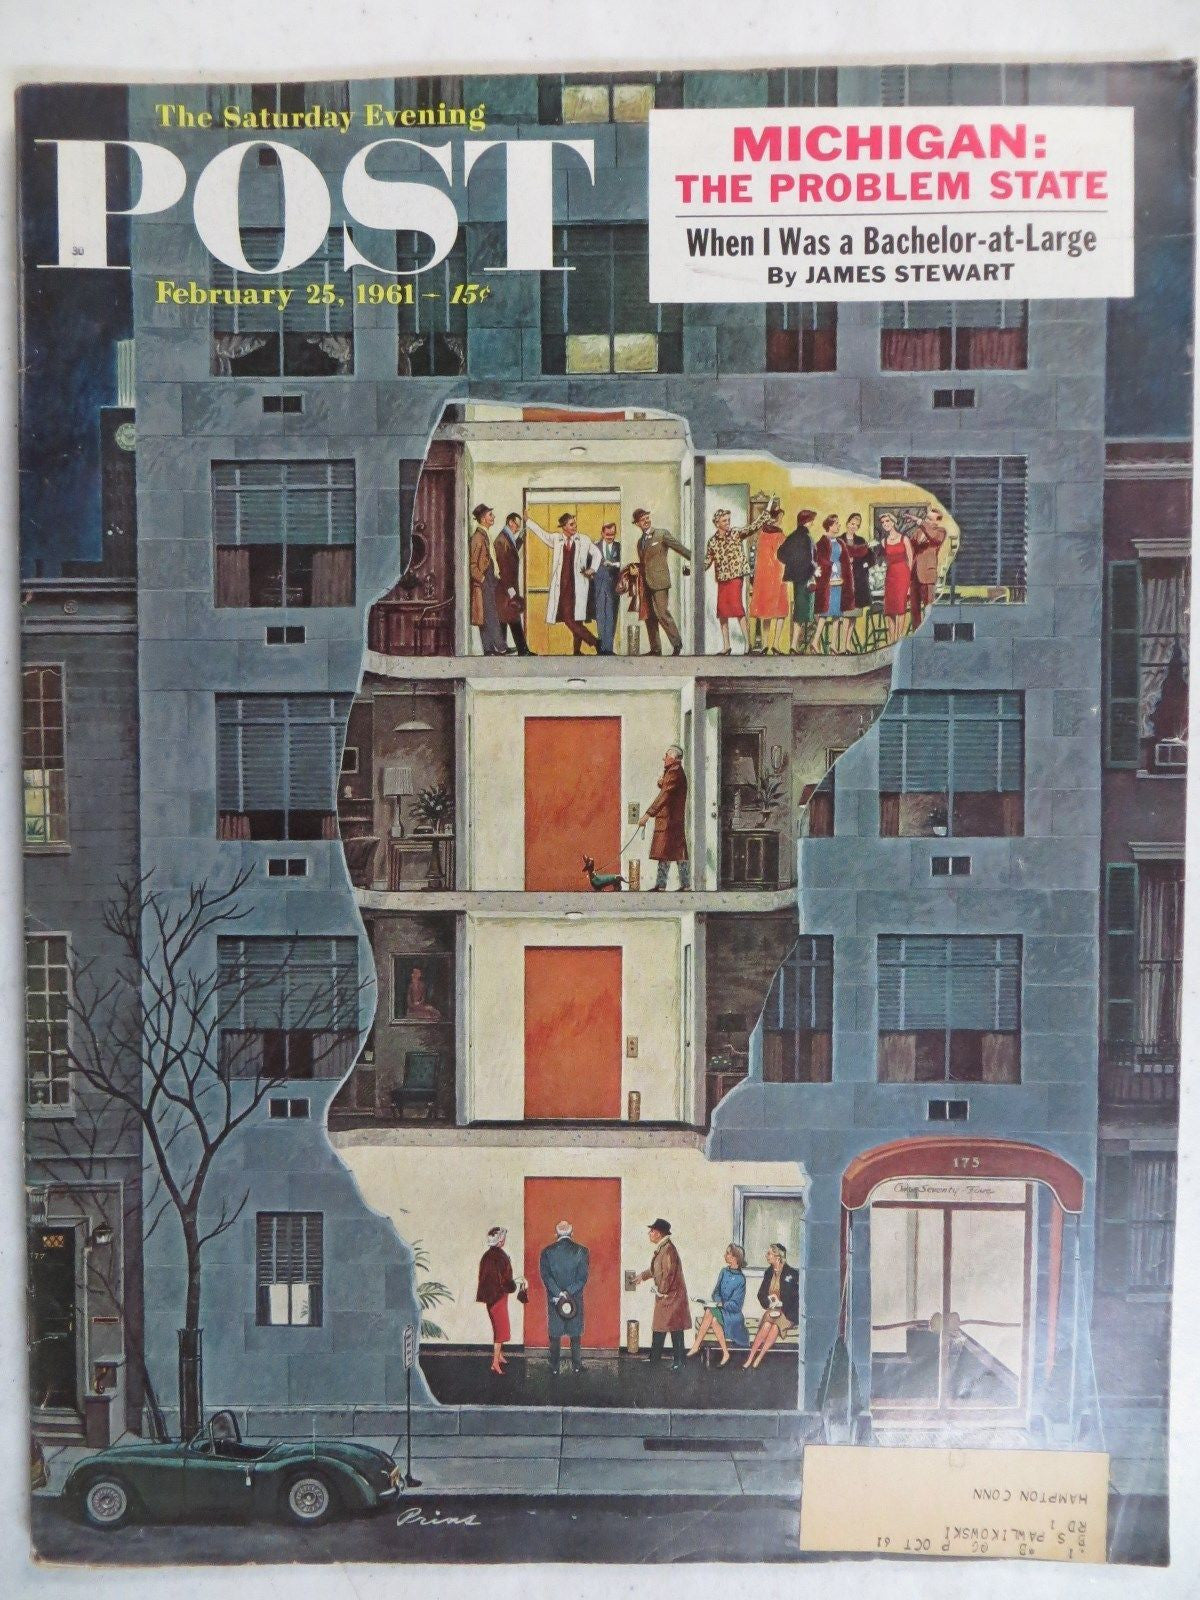 The Saturday Evening Post (February 25, 1961 Issue) - Vintage Magazine